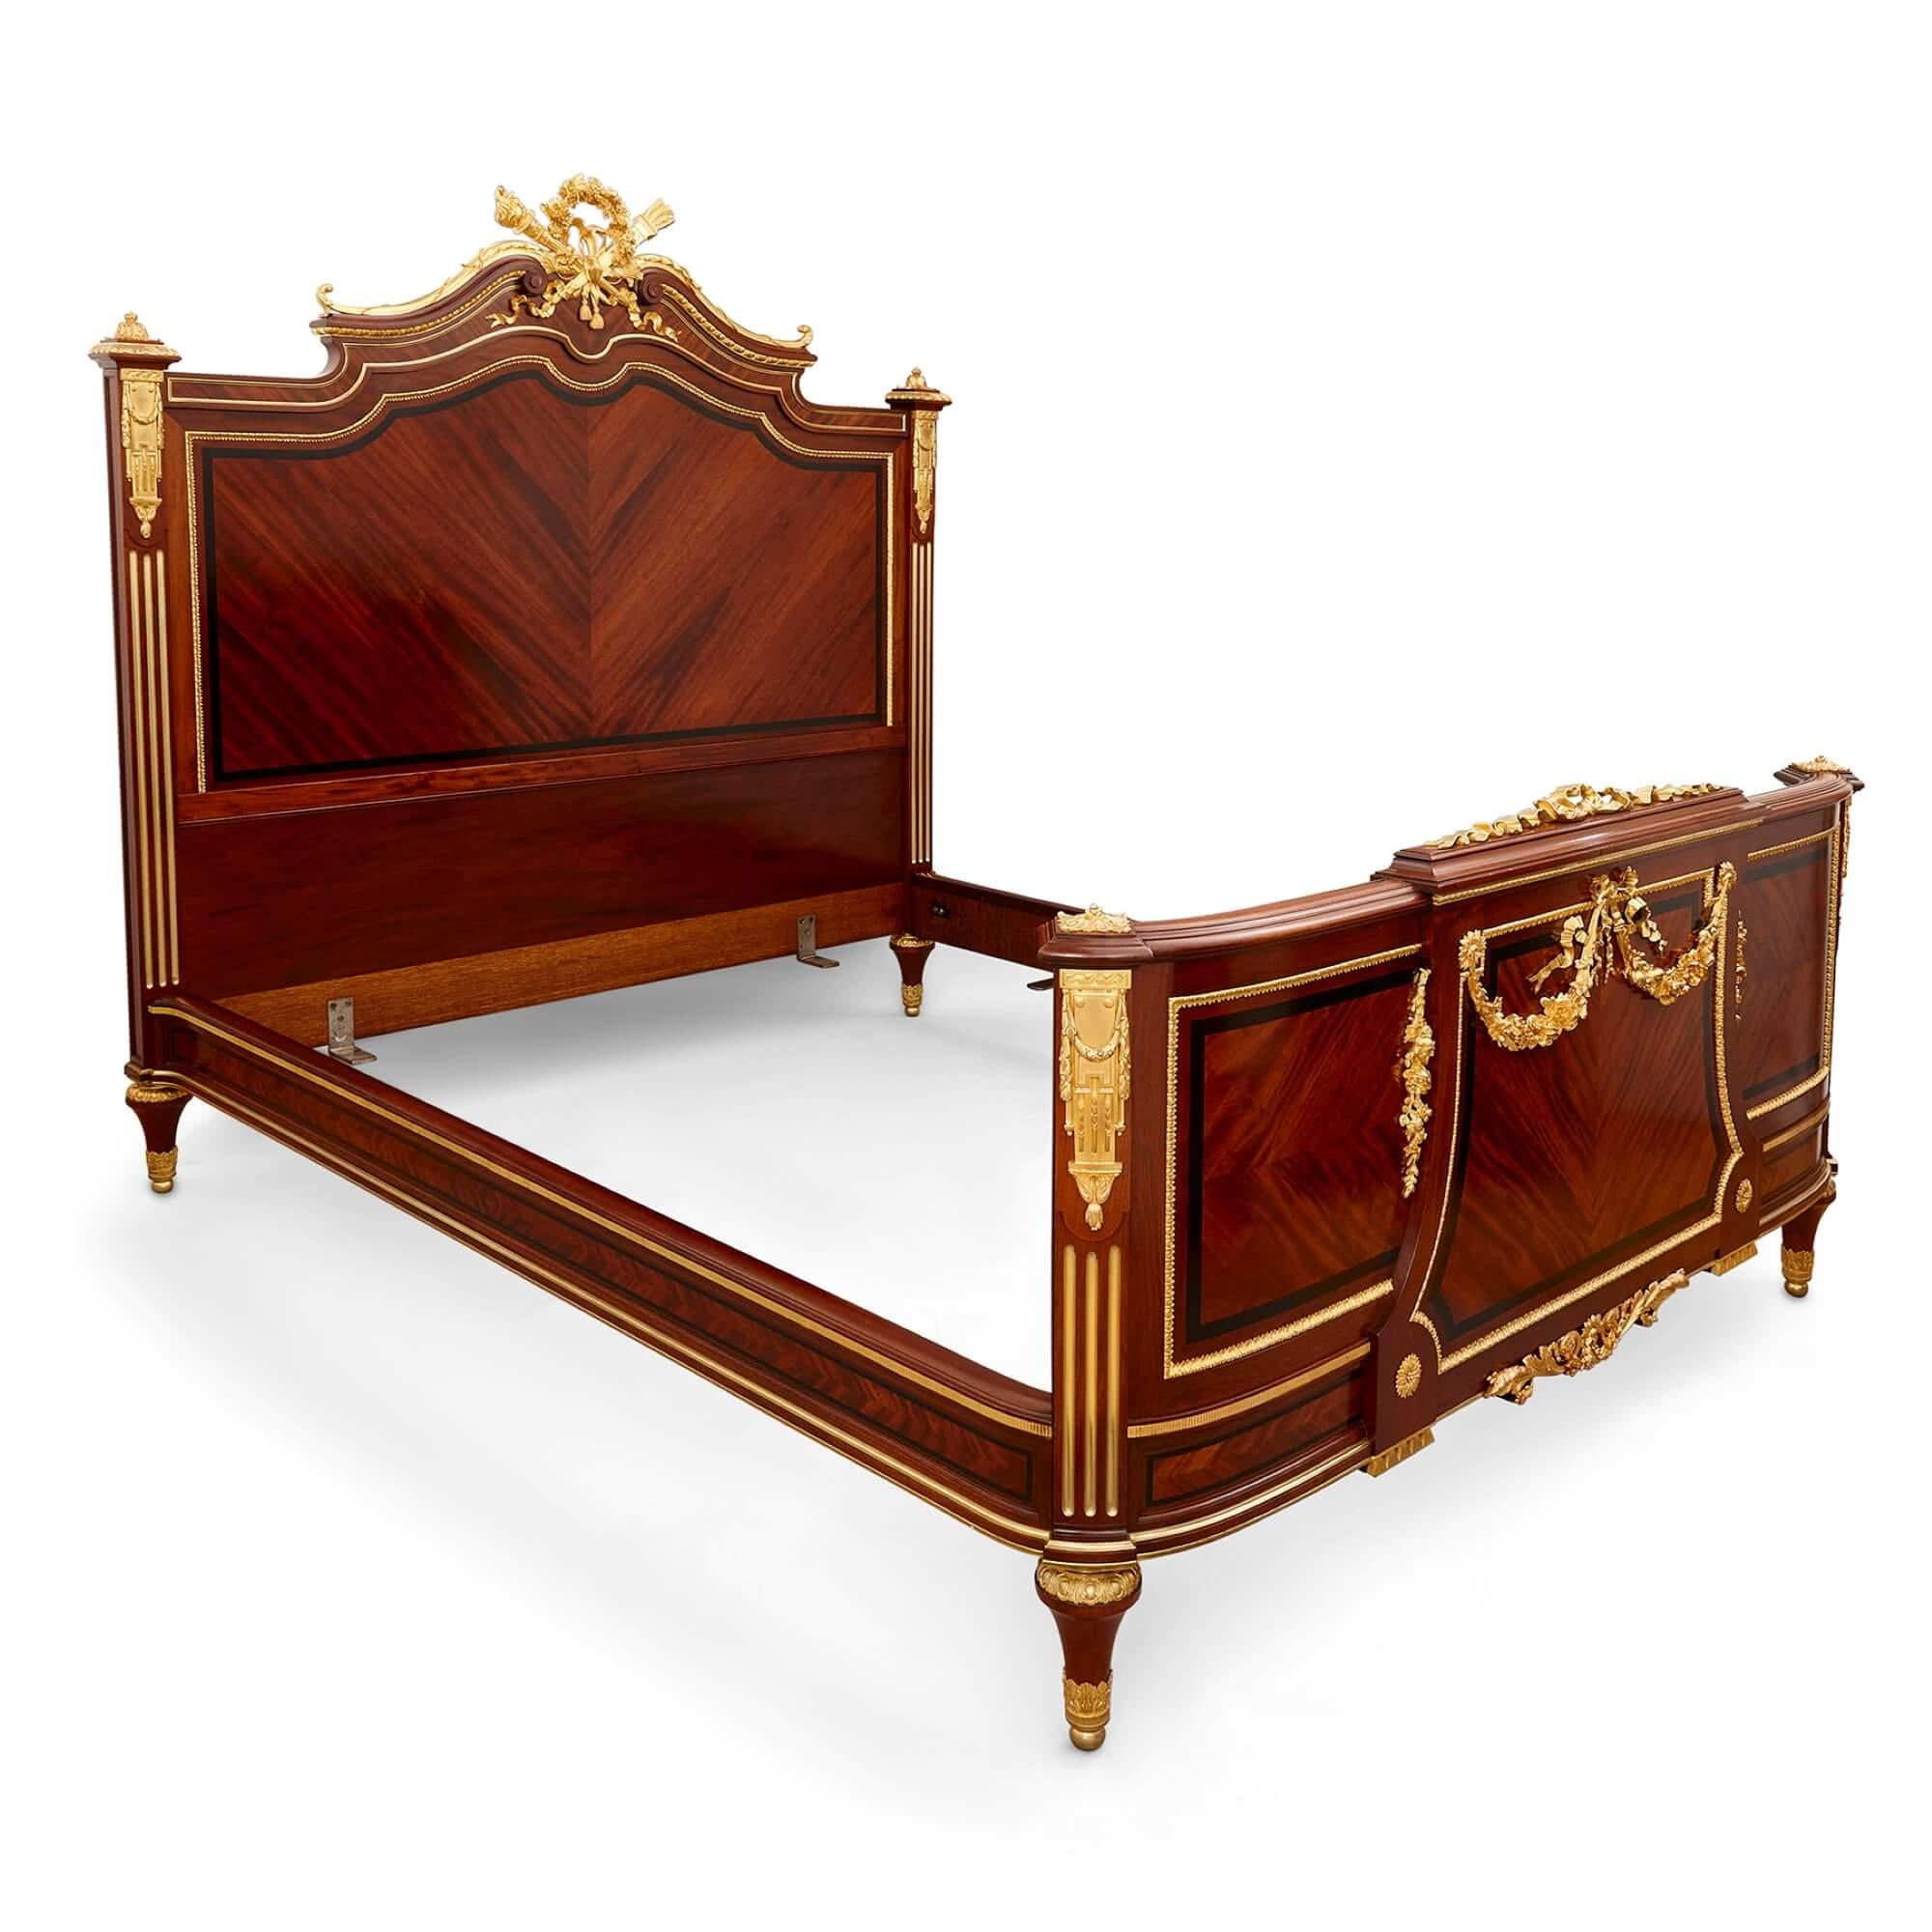 Antique French gilt bronze and mahogany bed by Paul Sormani 
French, c. 1870 
Height 178cm, width 176cm, depth 214cm

Decorated with various ormolu (gilt bronze) mounts and beautifully crafted from mahogany, the bed was made in France by Paul Sormai